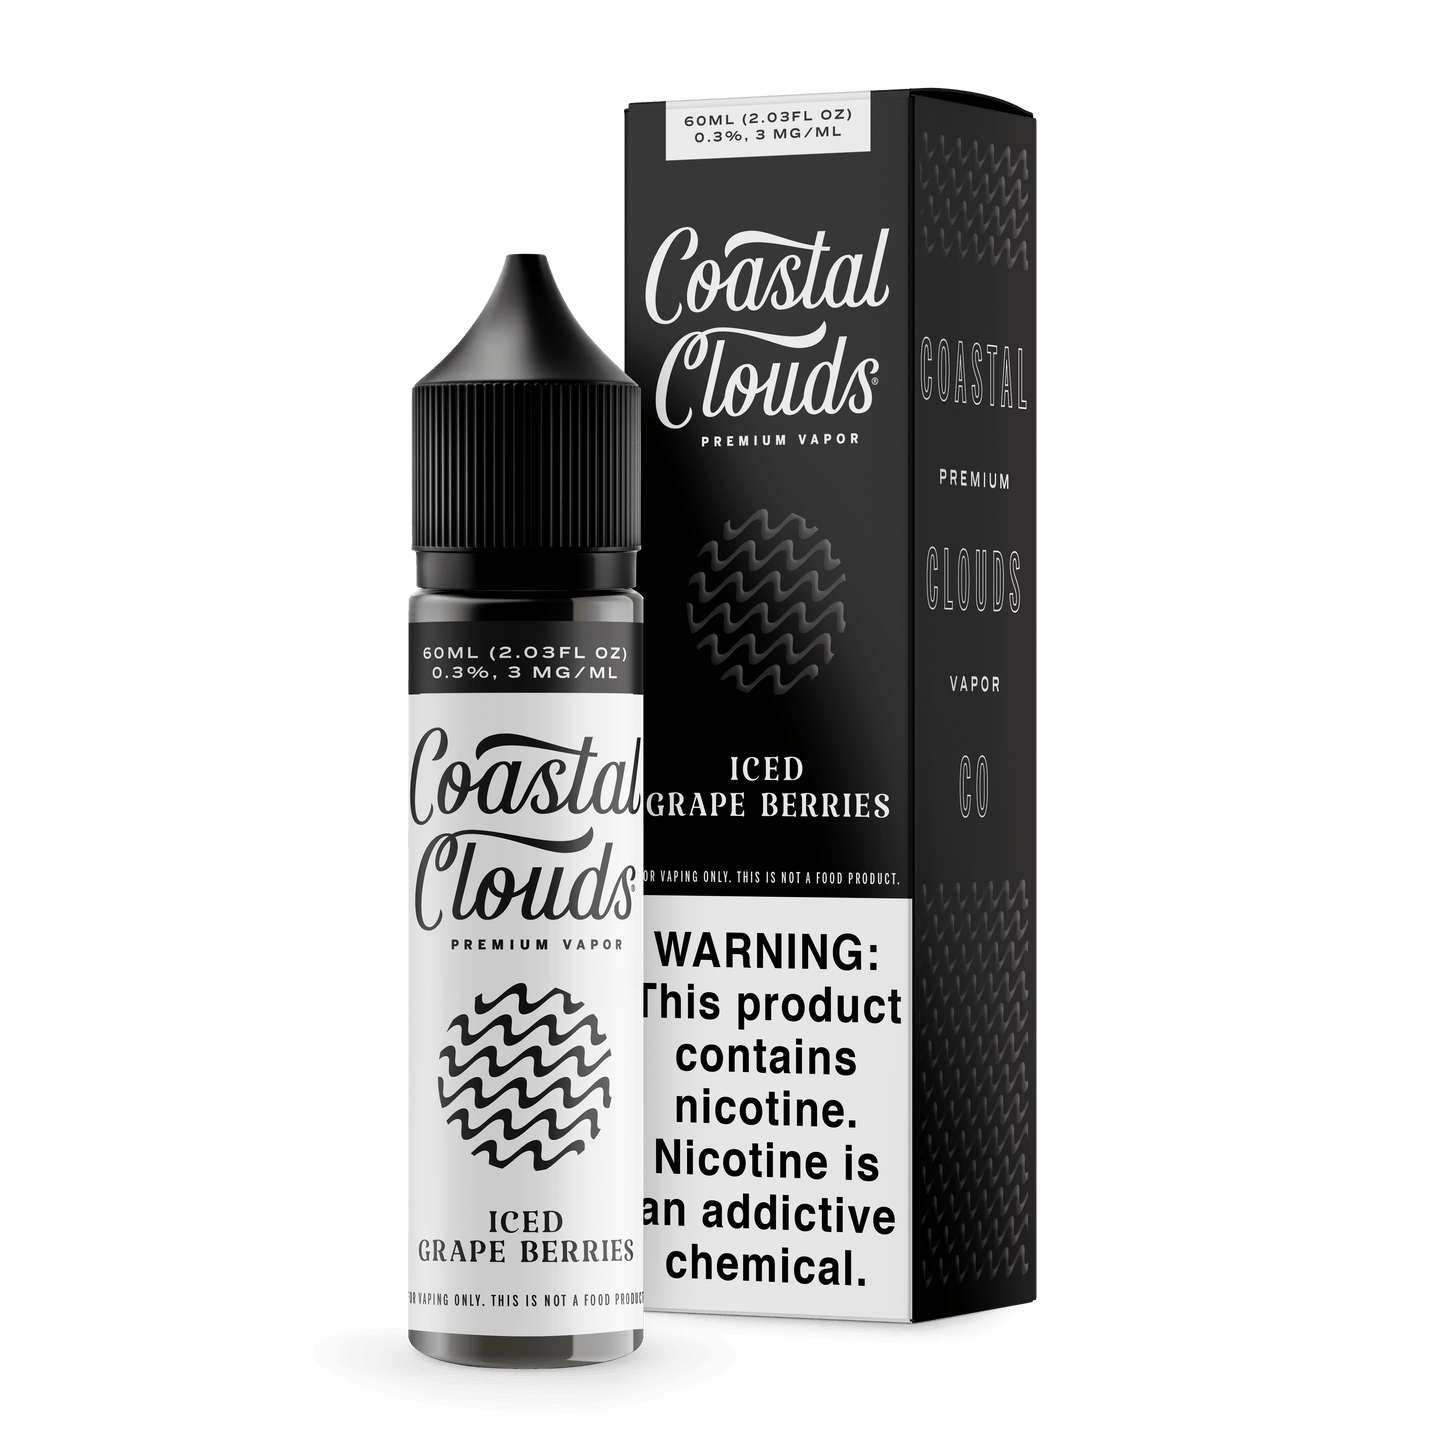 Iced Grape Berries by Coastal Clouds Series 60mL with Packaging